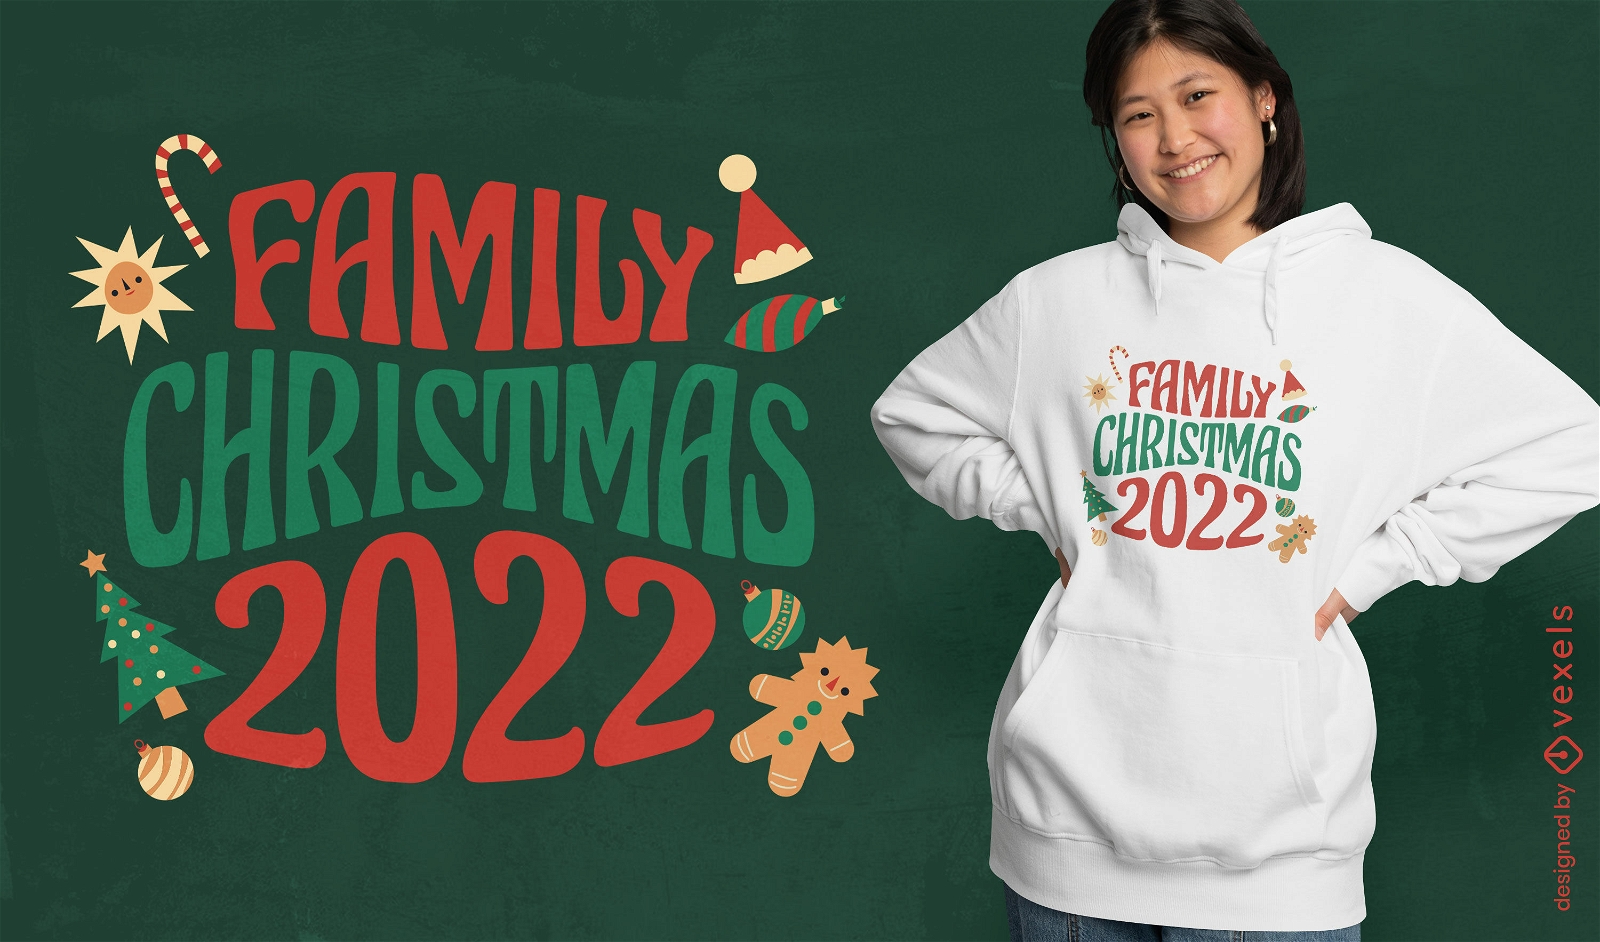 Family christmas quote t-shirt design